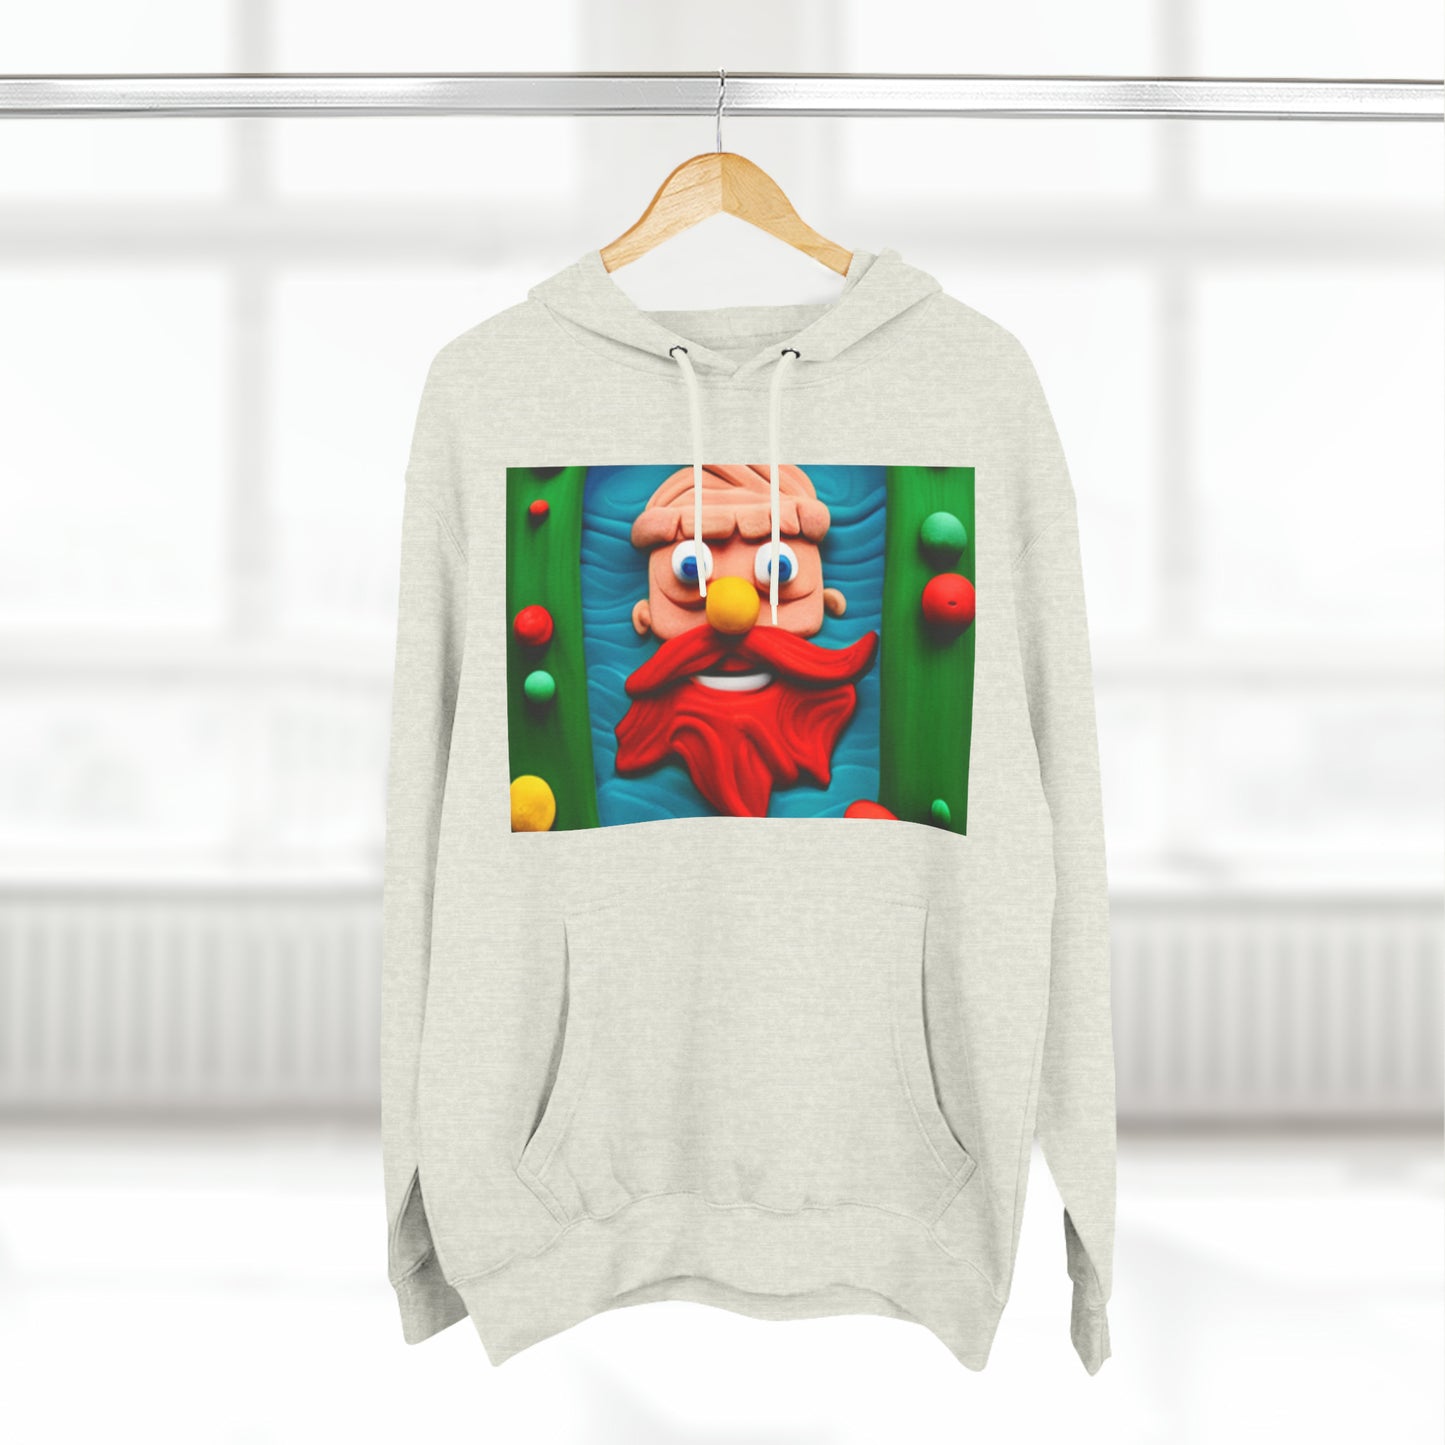 Ugly Mold Animation - Unisex Premium Pullover Hoodie